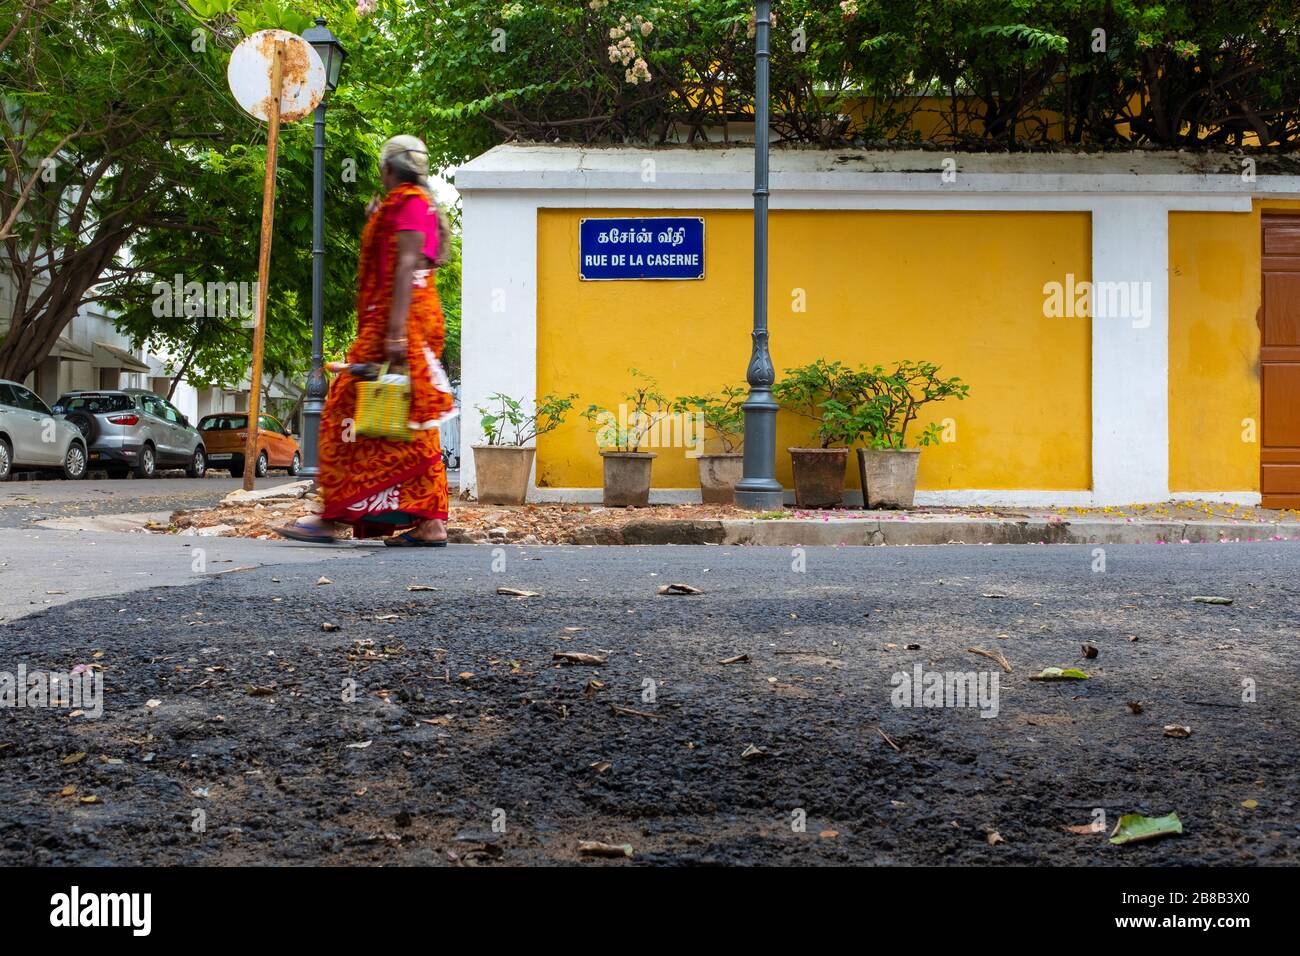 Pondicherry, India - March 19, 2018: Unrecognisable woman wearing bright colours is walking by a street sign in French Stock Photo